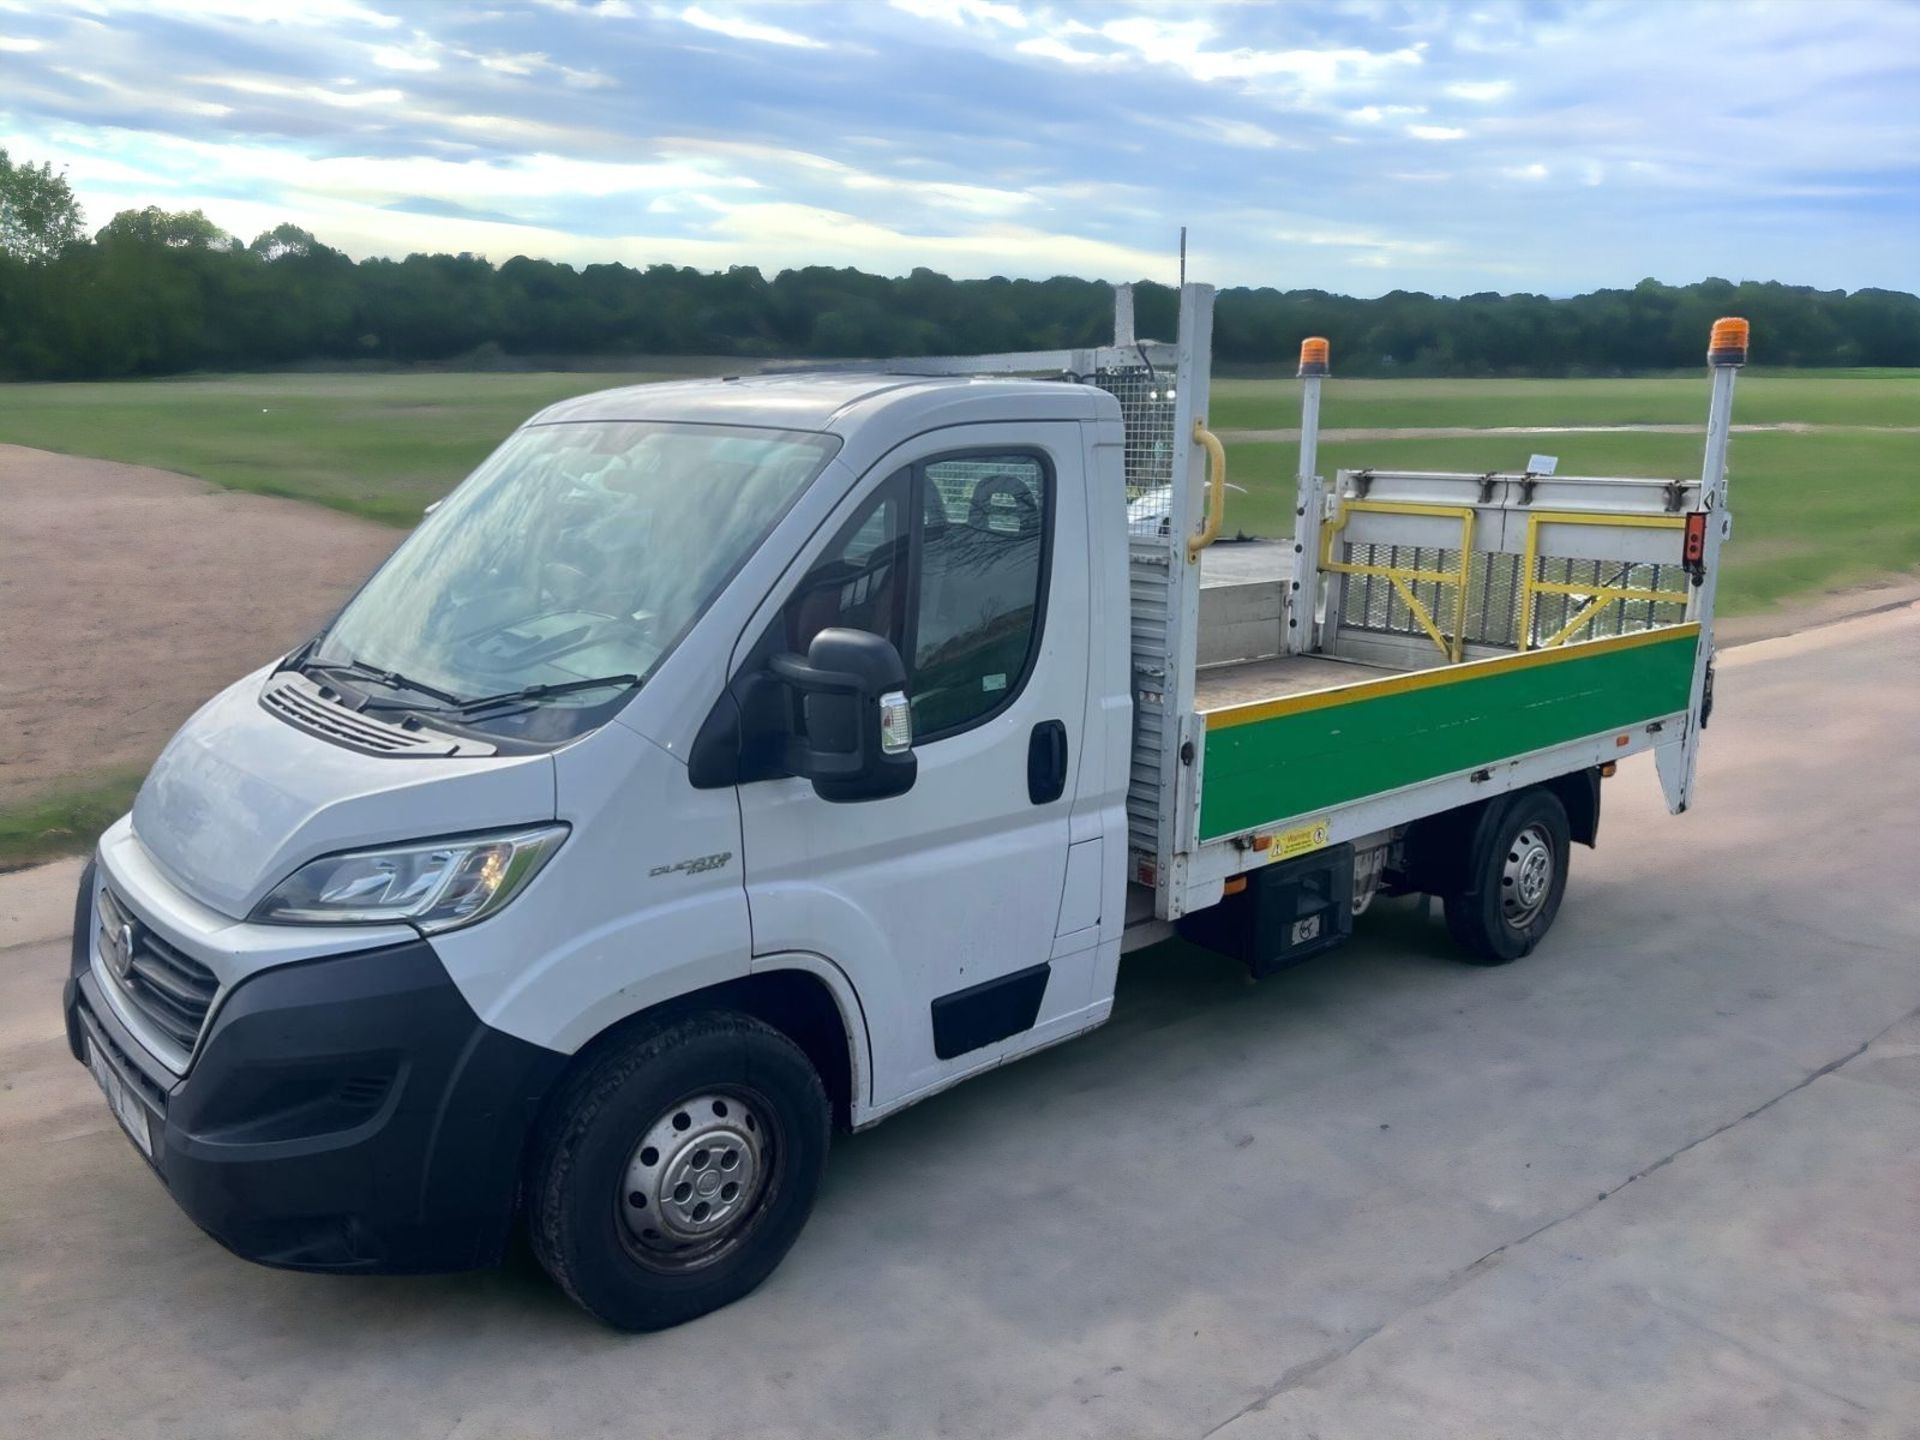 2018 FIAT DUCATO DROPSIDE TRUCK WITH TAIL LIFT**(ONLY 79K MILEAGE)**